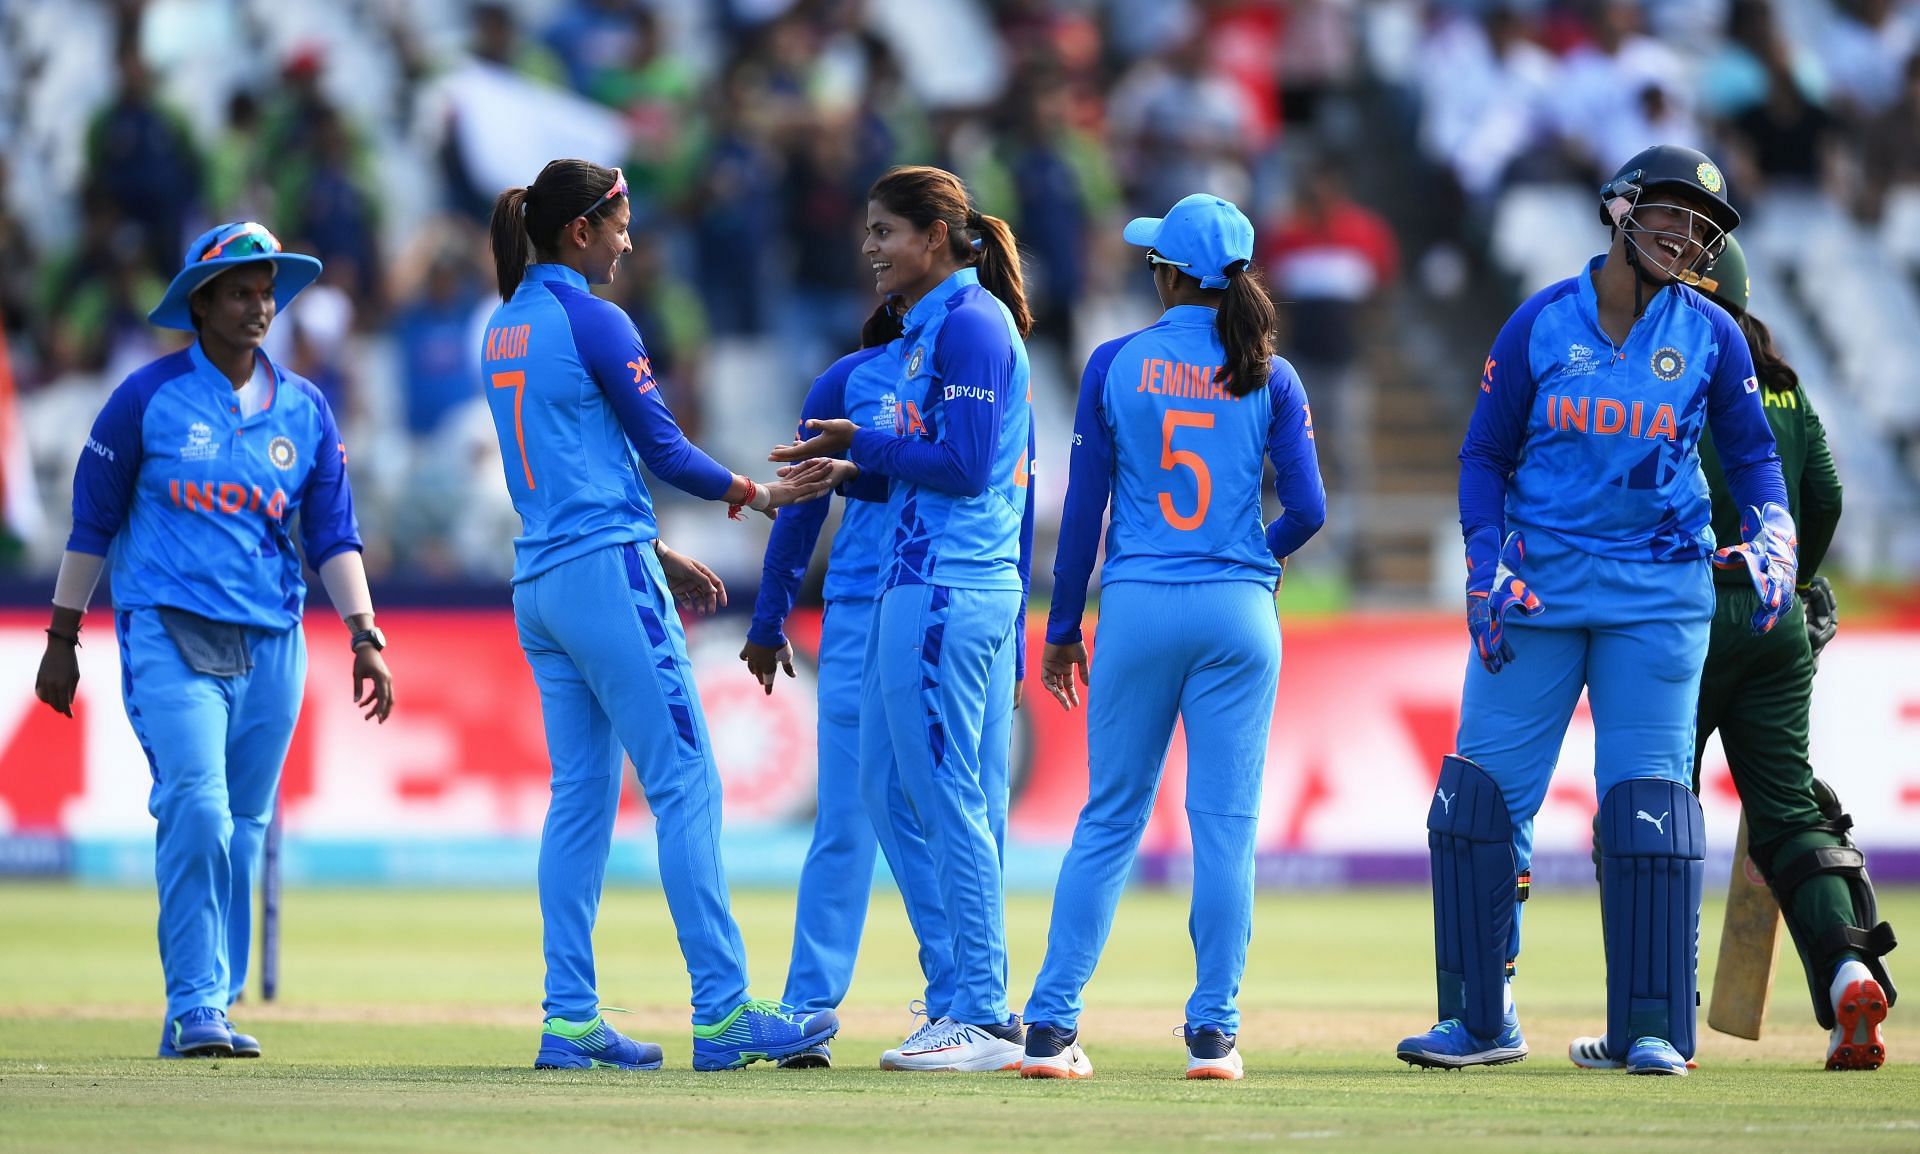 IND-W vs ENG-W Women's T20 World Cup 2023: St. George's Park, Gqeberha Pitch history, and T20 Women's World Cup records